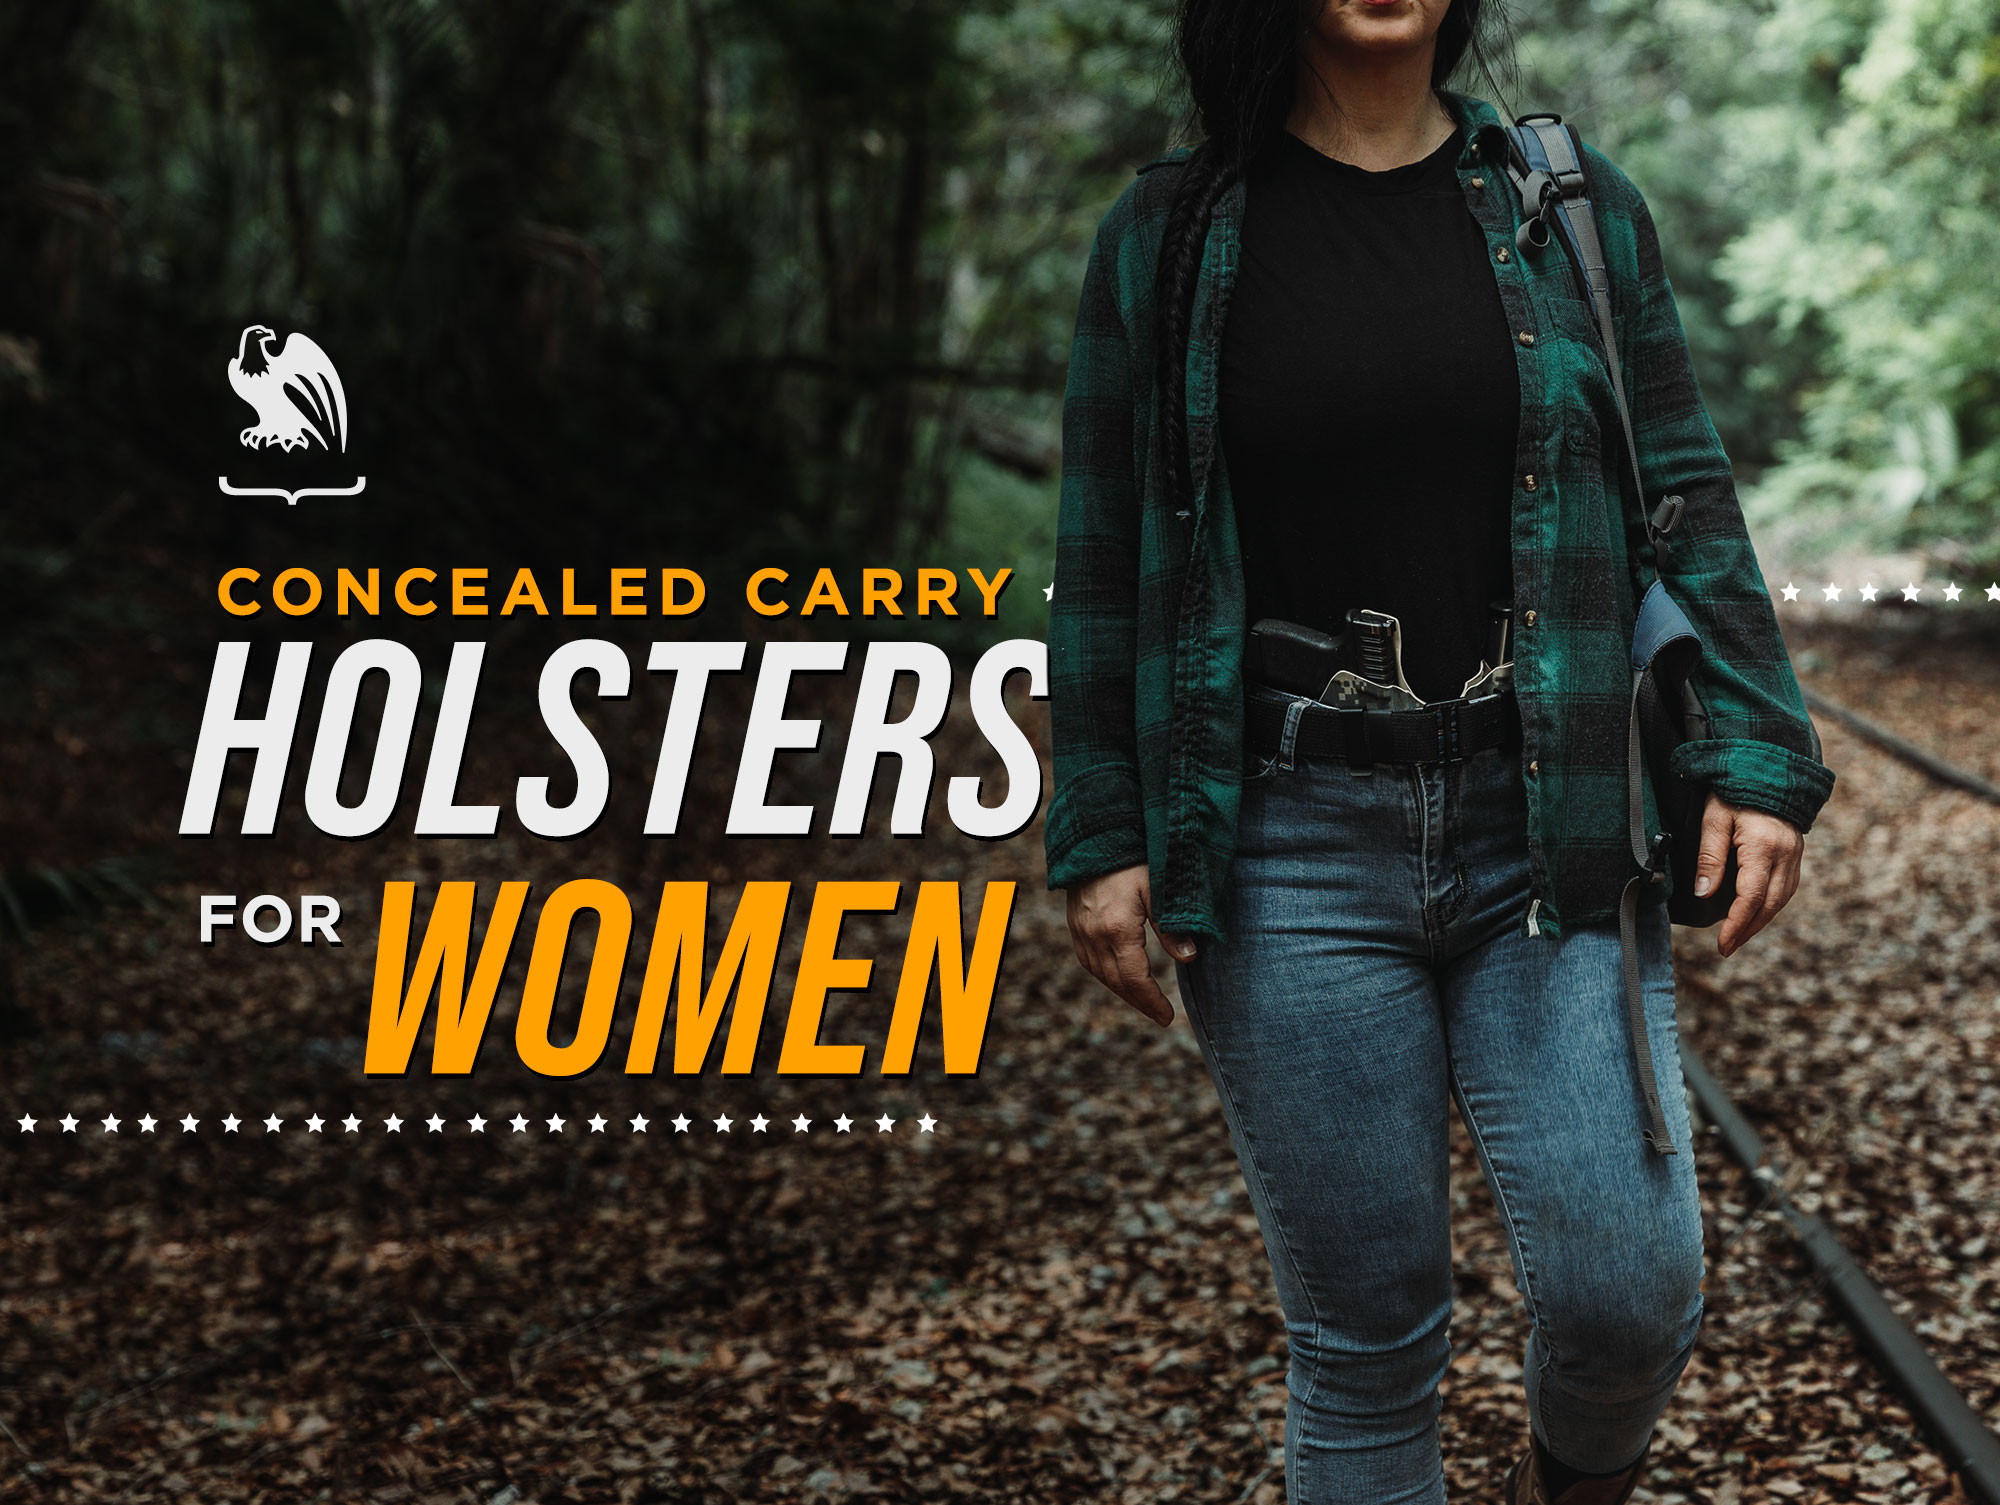 About Concealed Carry Holsters For Women  Concealed carry holsters, Bra  holster, Concealed carry women